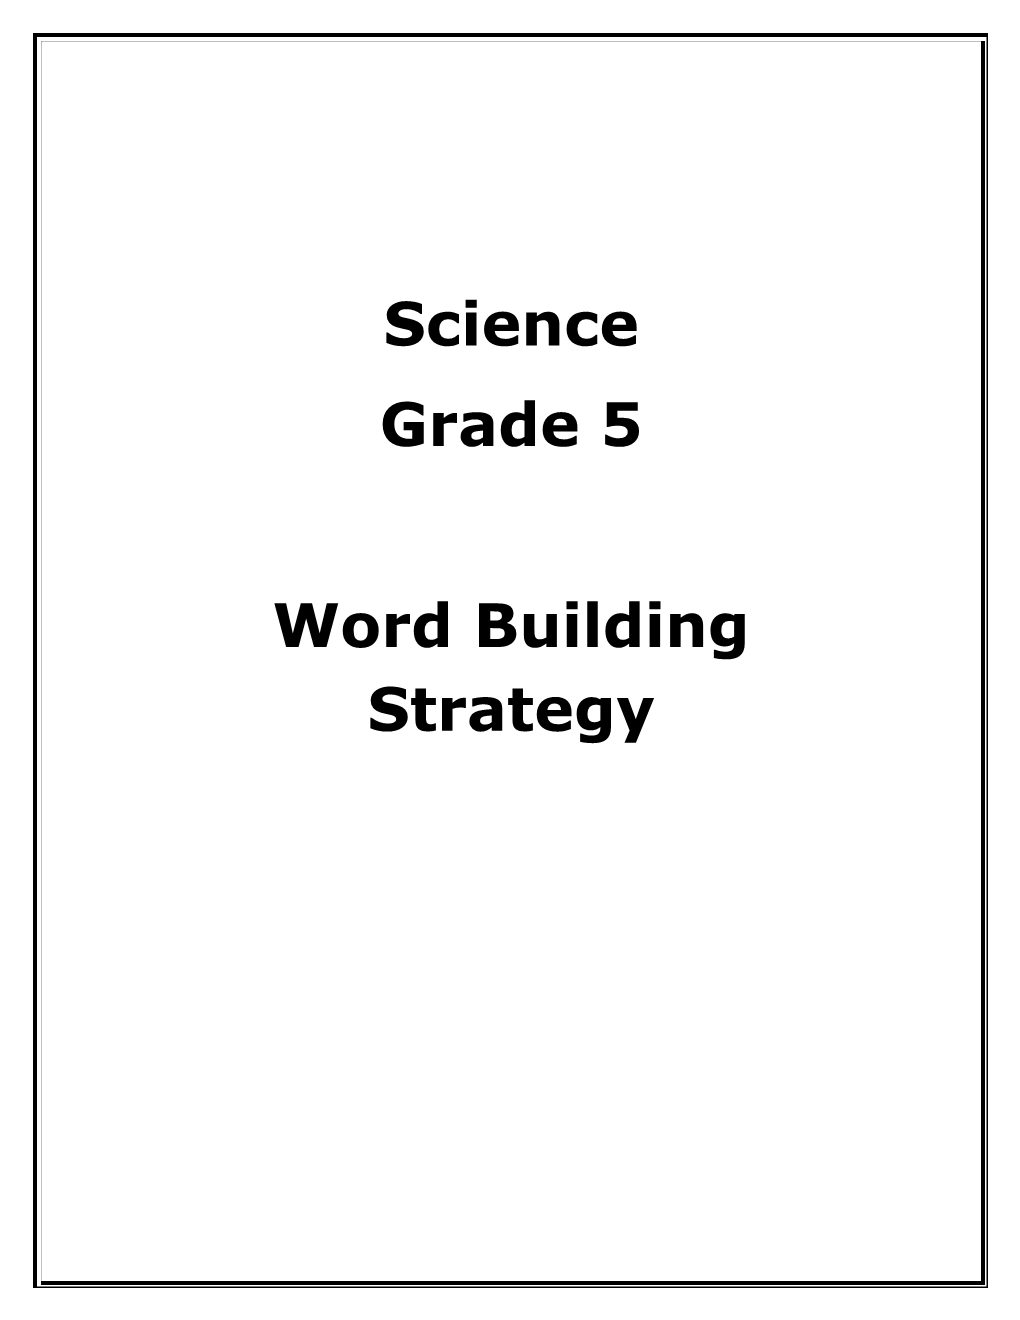 Word Building Strategy Performance Task Scenario for Word Building Strategy